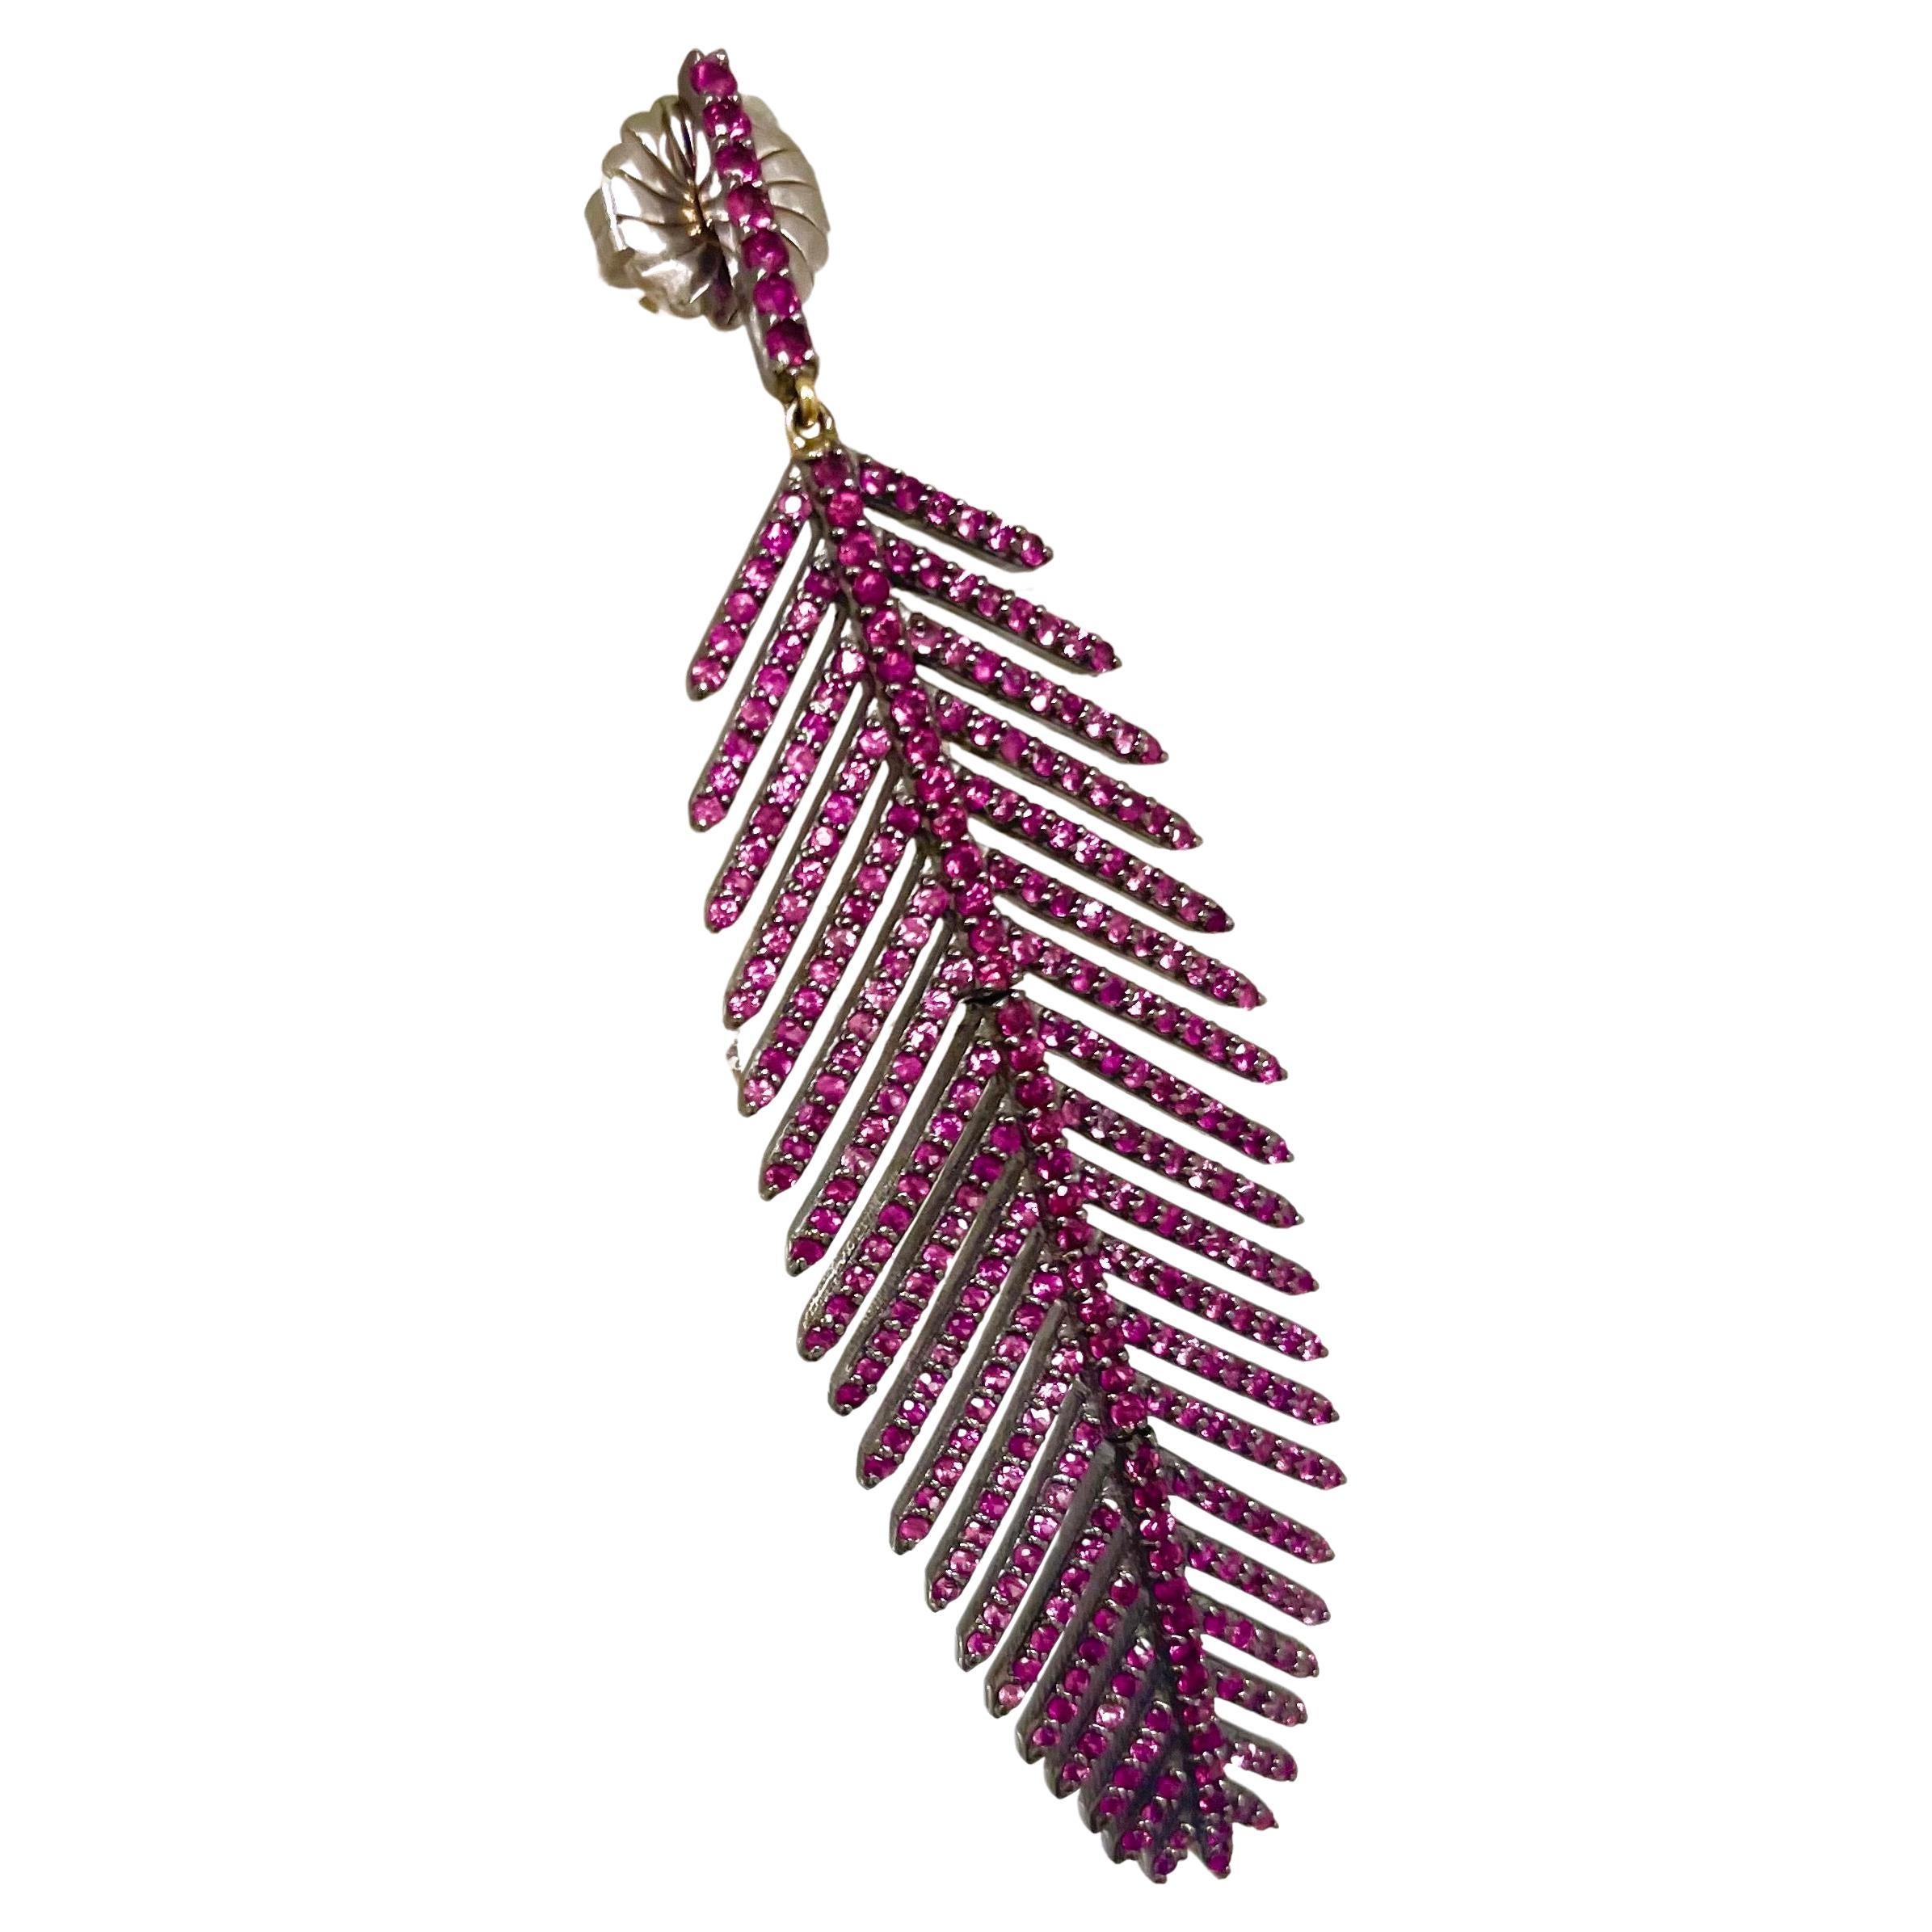 Description
Eye catching, exquisite, stunning pink sapphire enhanced by red rubies on the ear post and along the feather quill line. 
Item #E3297

Materials and Weight
Pink Sapphire and ruby, total 6.17cts
Rhodium sterling silver
14k yellow gold